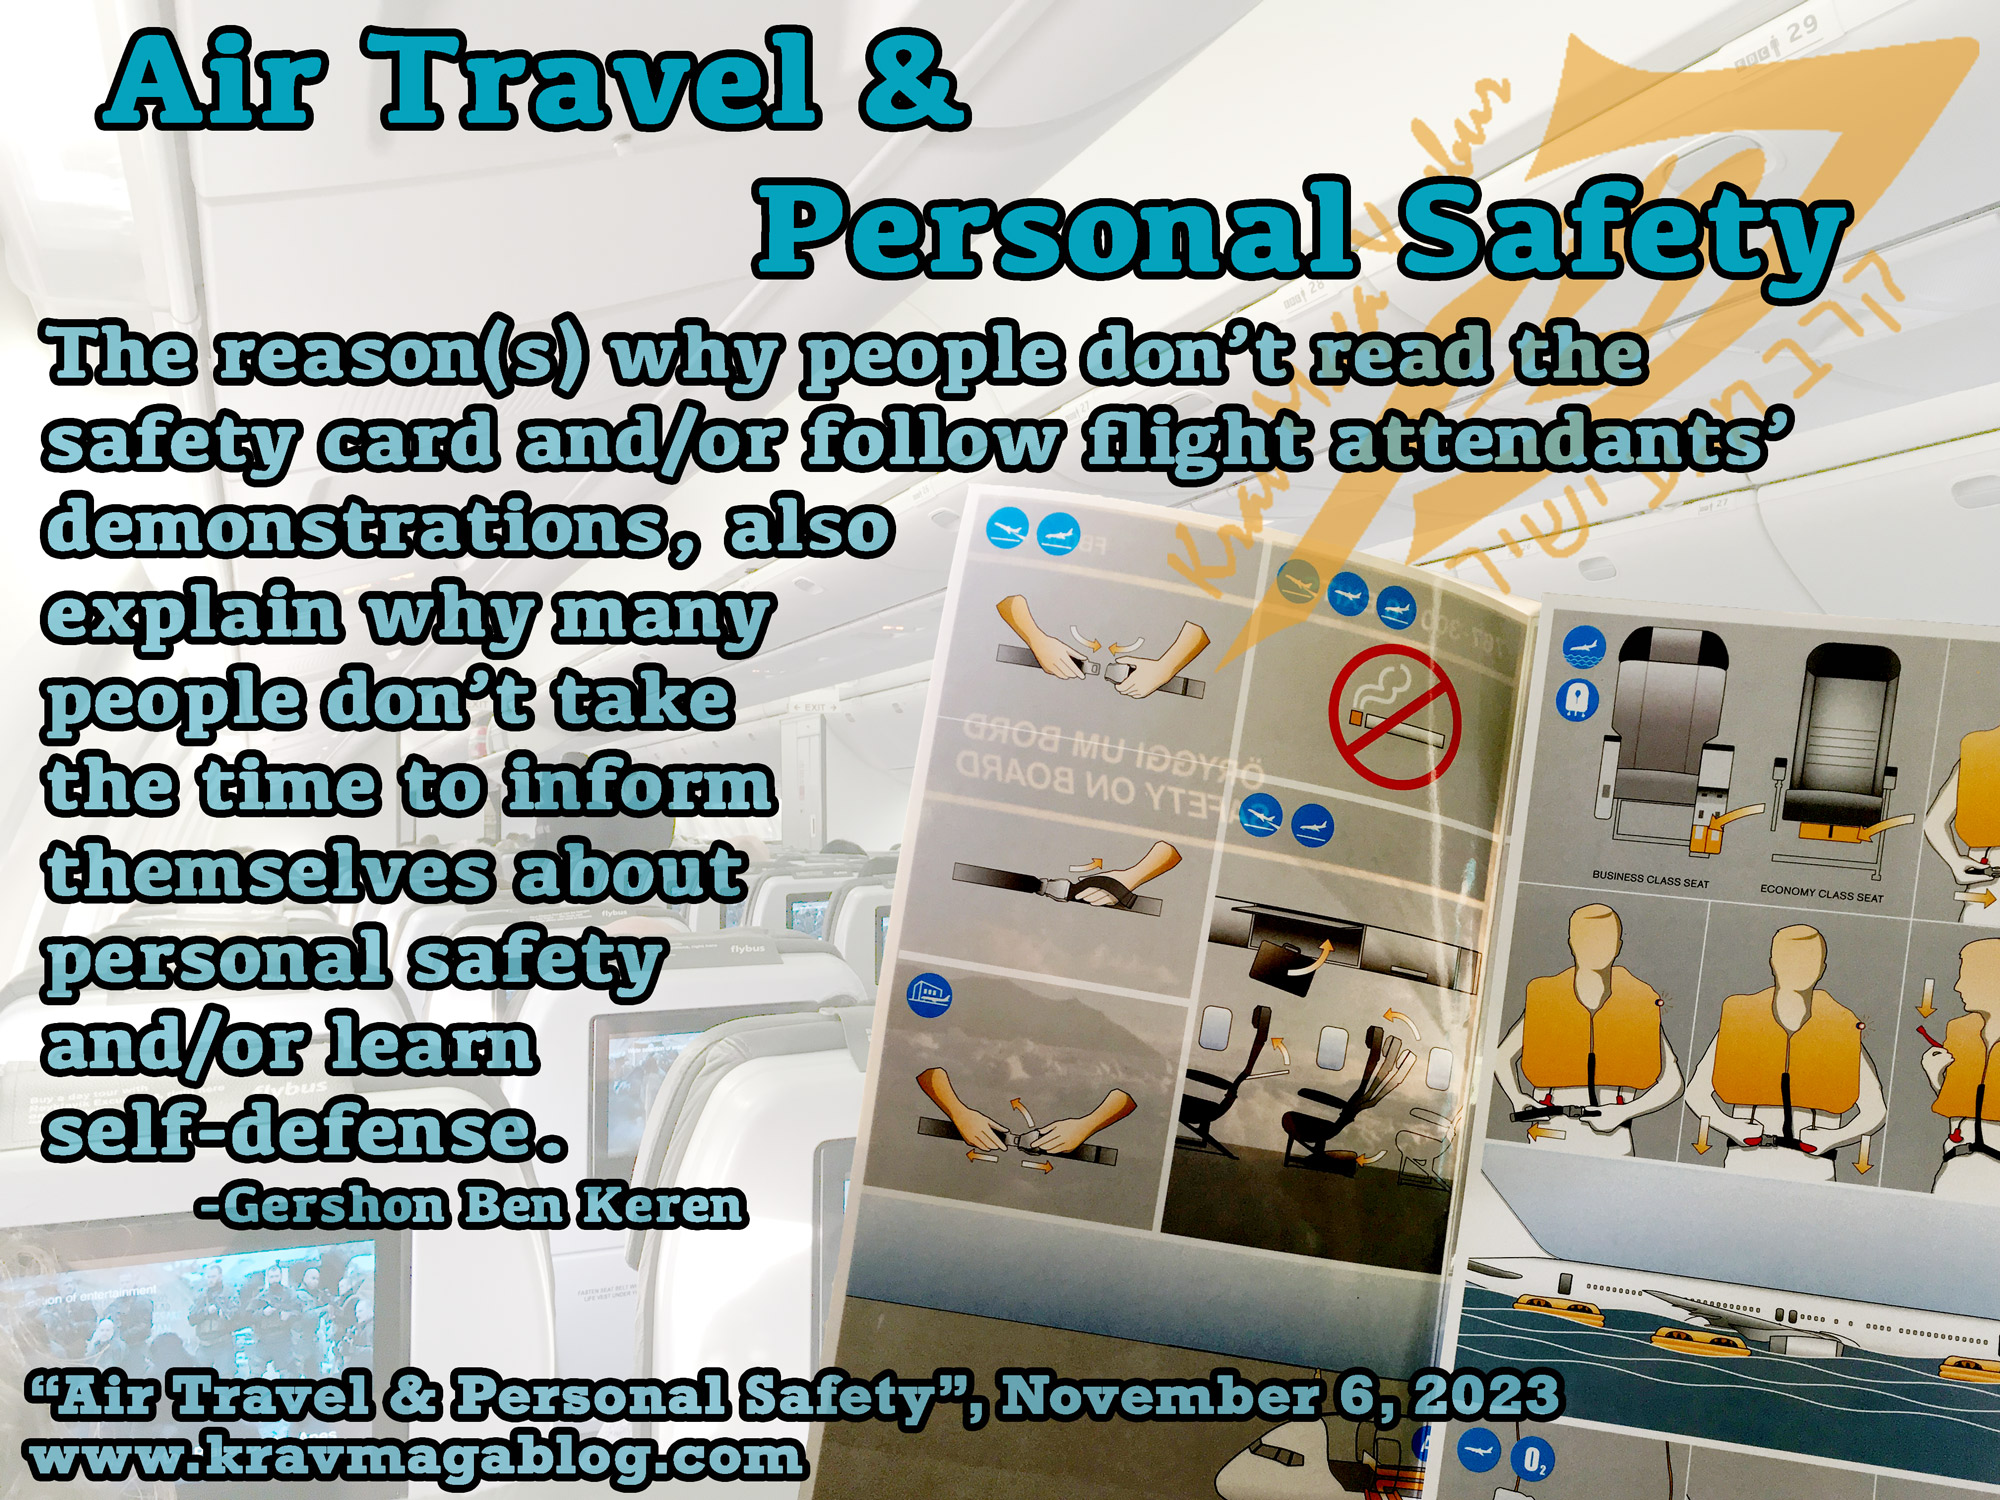 Blog About Air Travel & Personal Safety